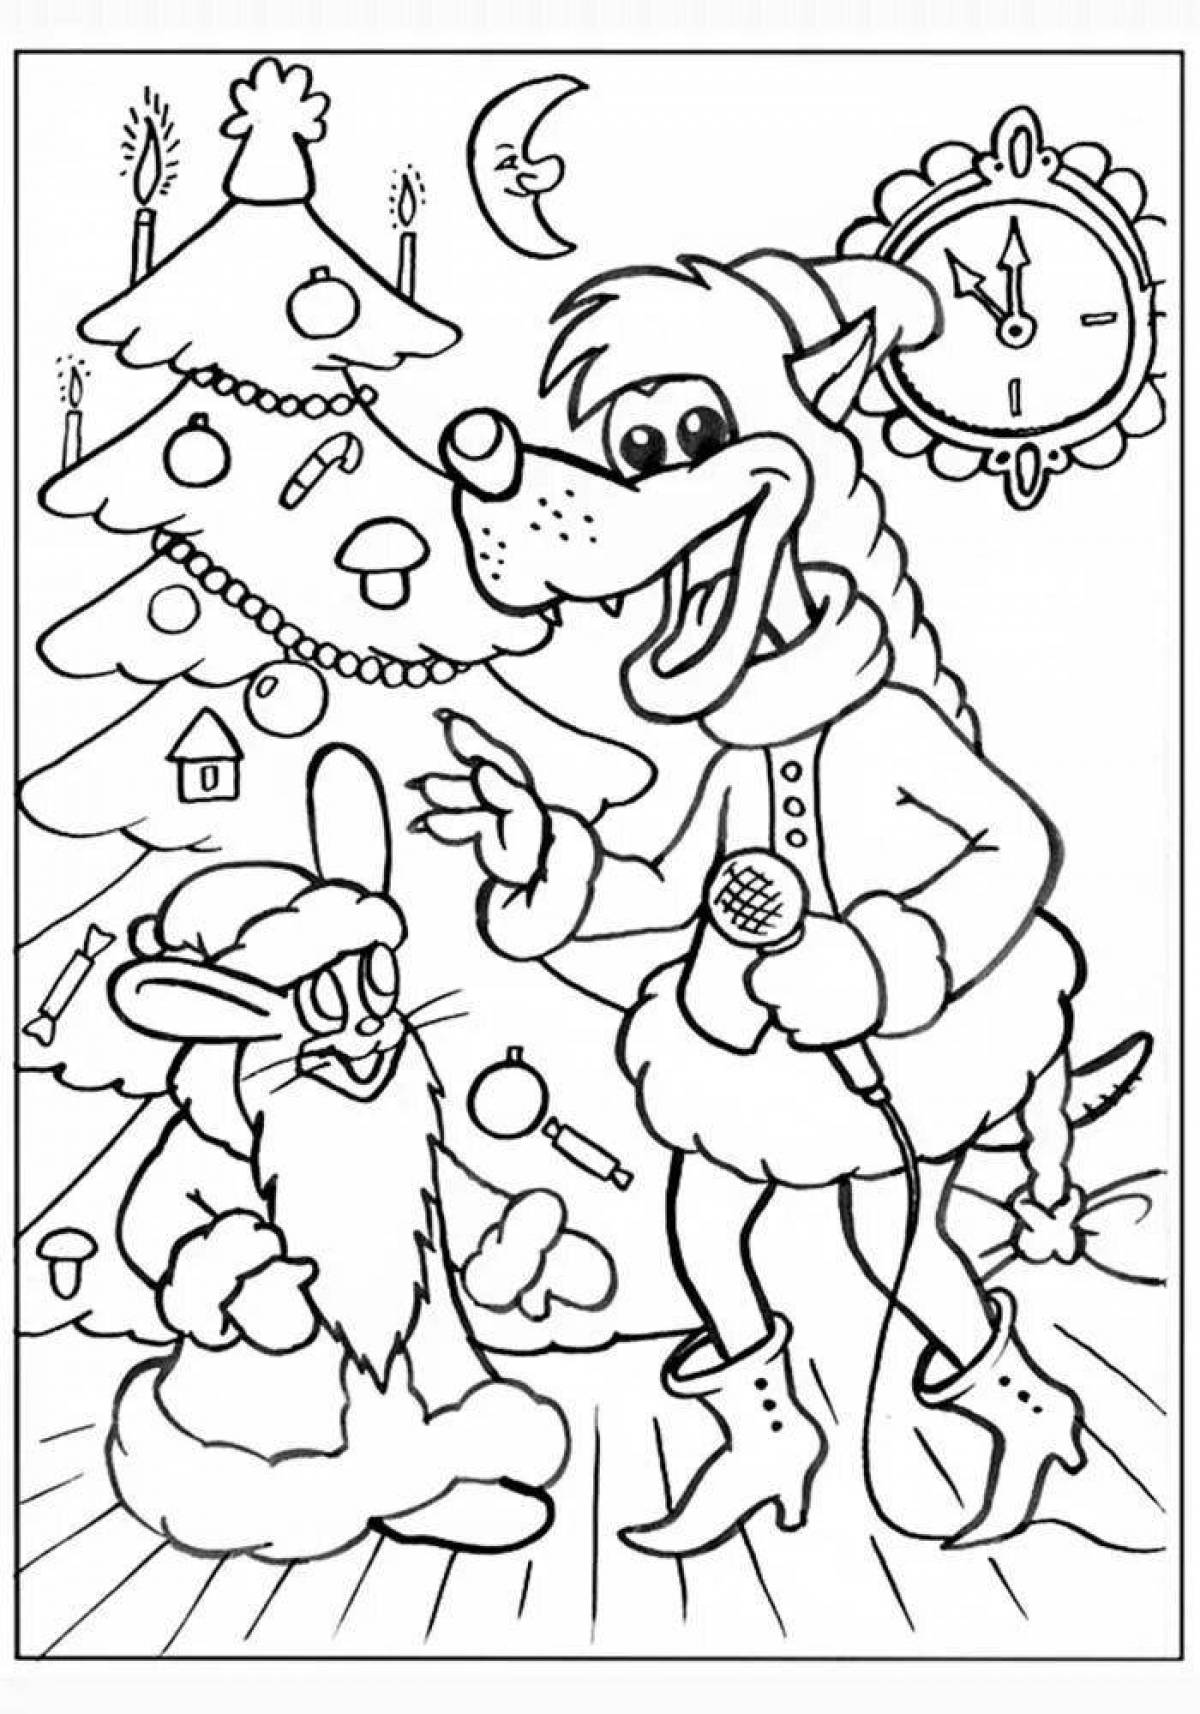 Majestic Christmas wolf coloring page